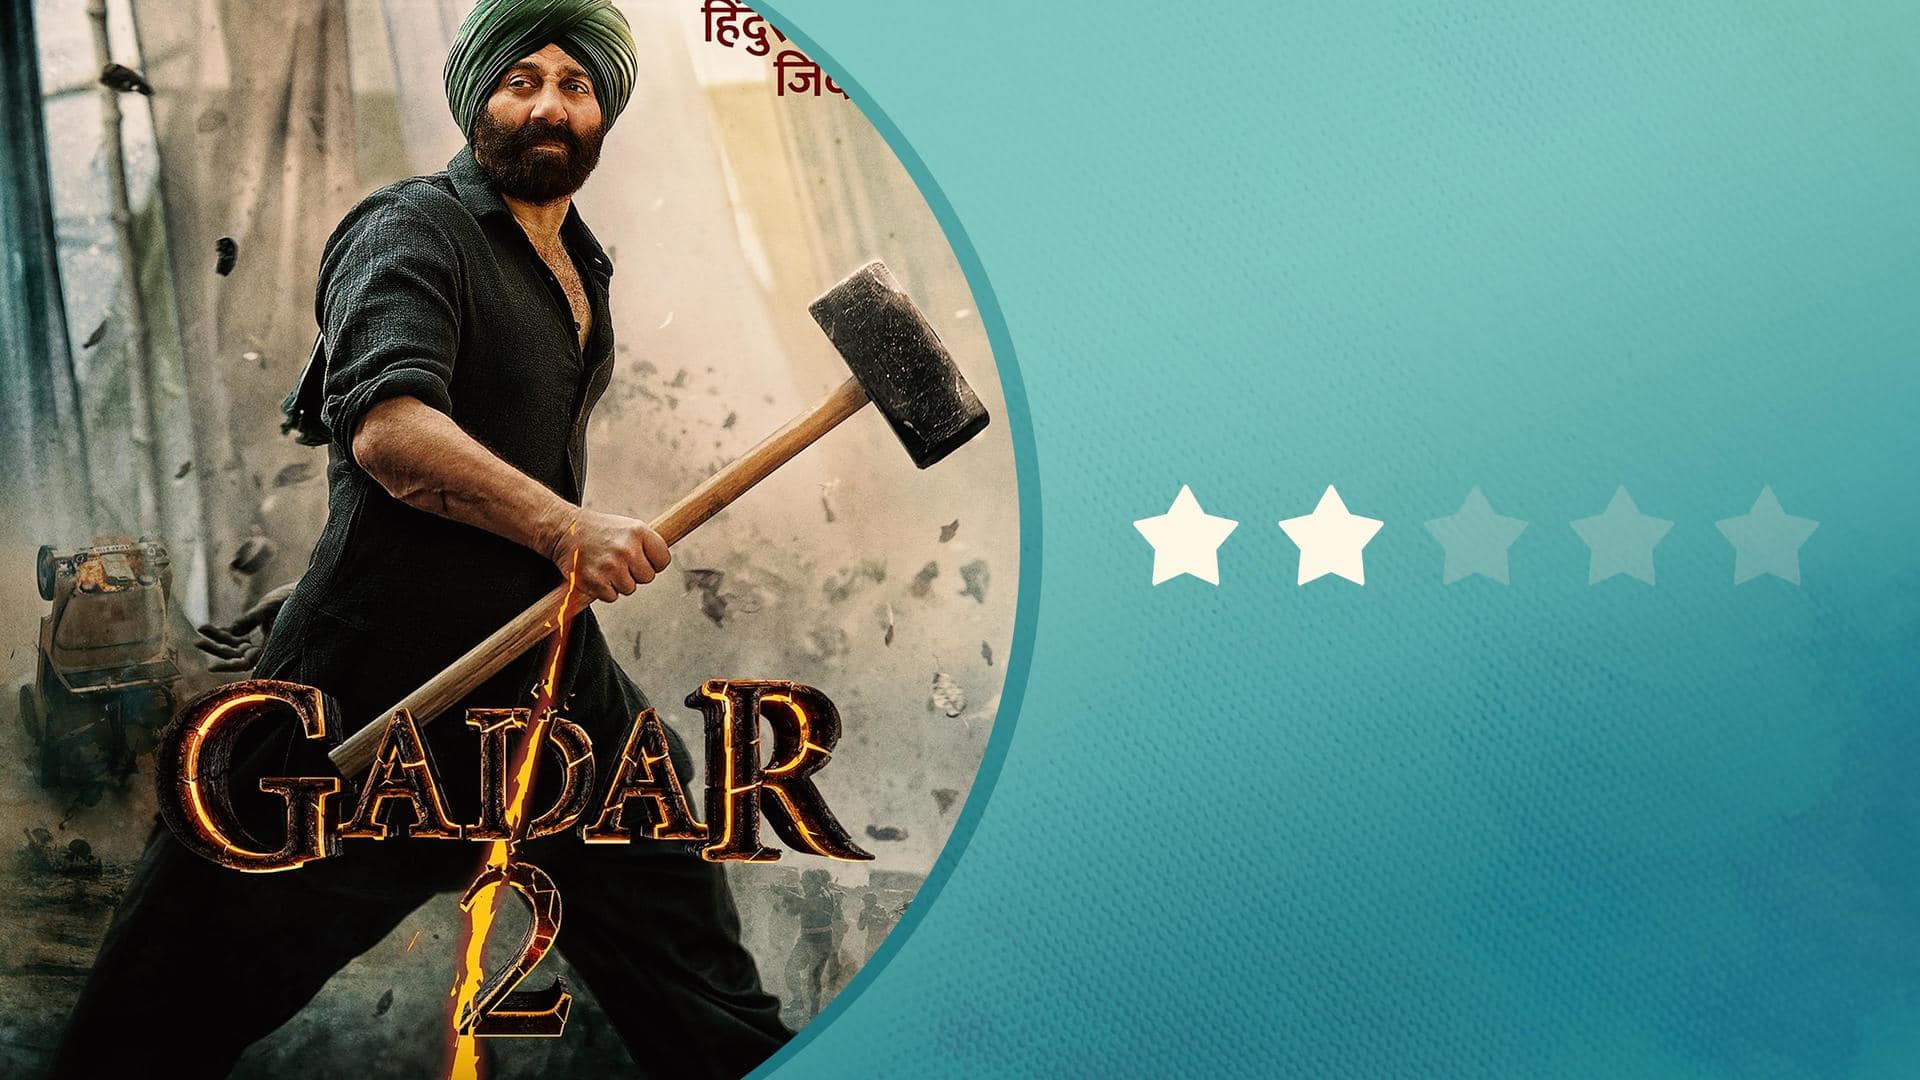 'Gadar 2' review: Stale story in a new packaging